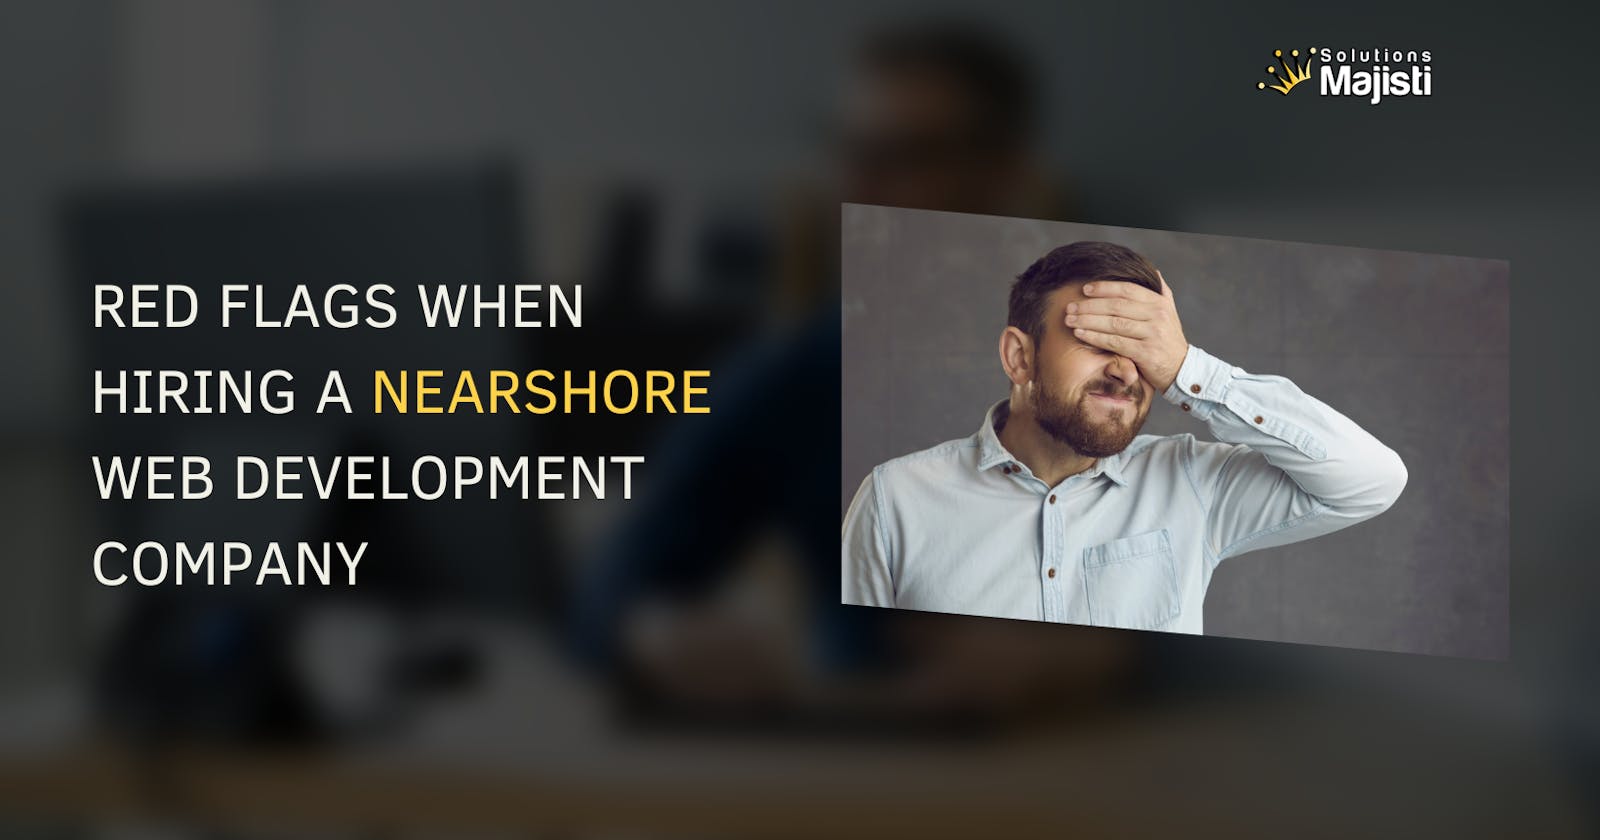 4 Red Flags to Watch Out For When Hiring a Nearshore Web Development Partner